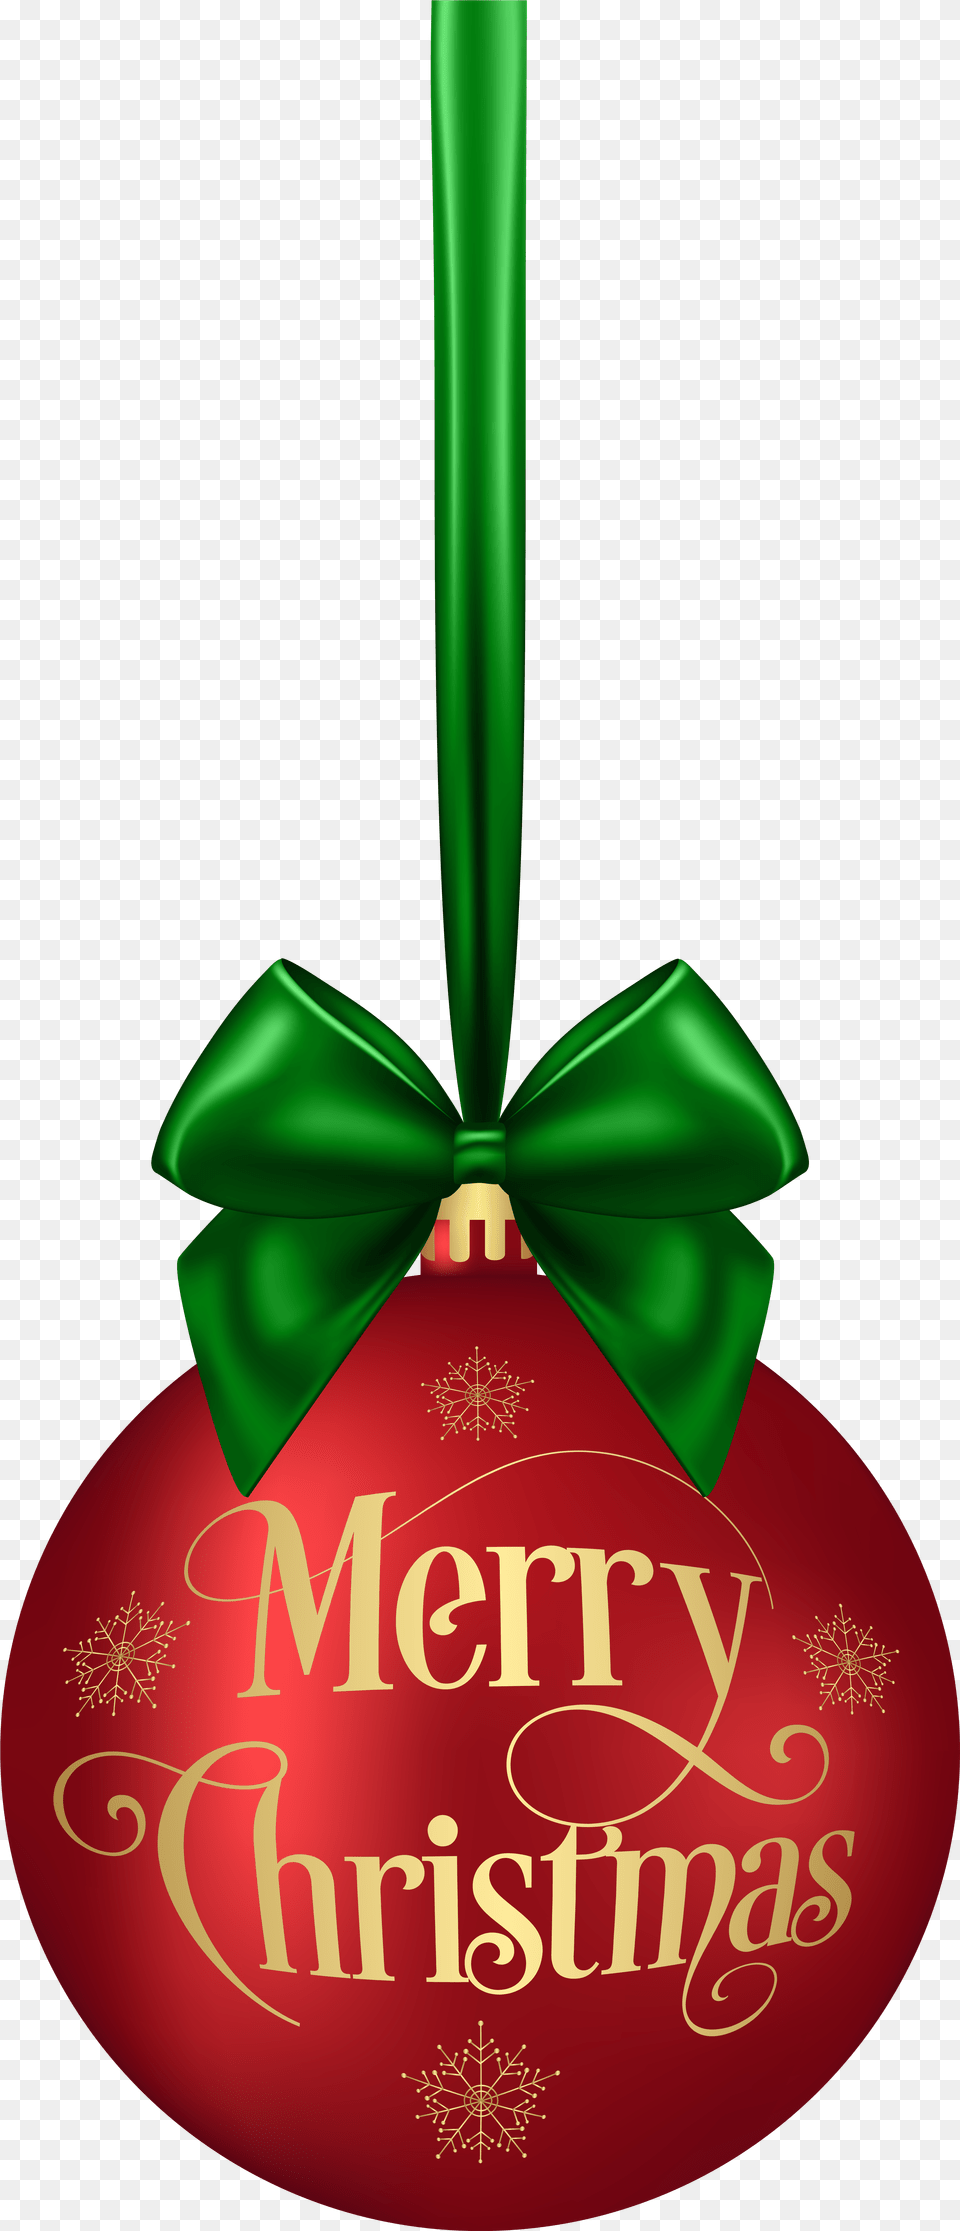 Download Free Merry Christmas Ball Red Clip Art Deco Merry Christmas Ball, Food, Ketchup Png Image